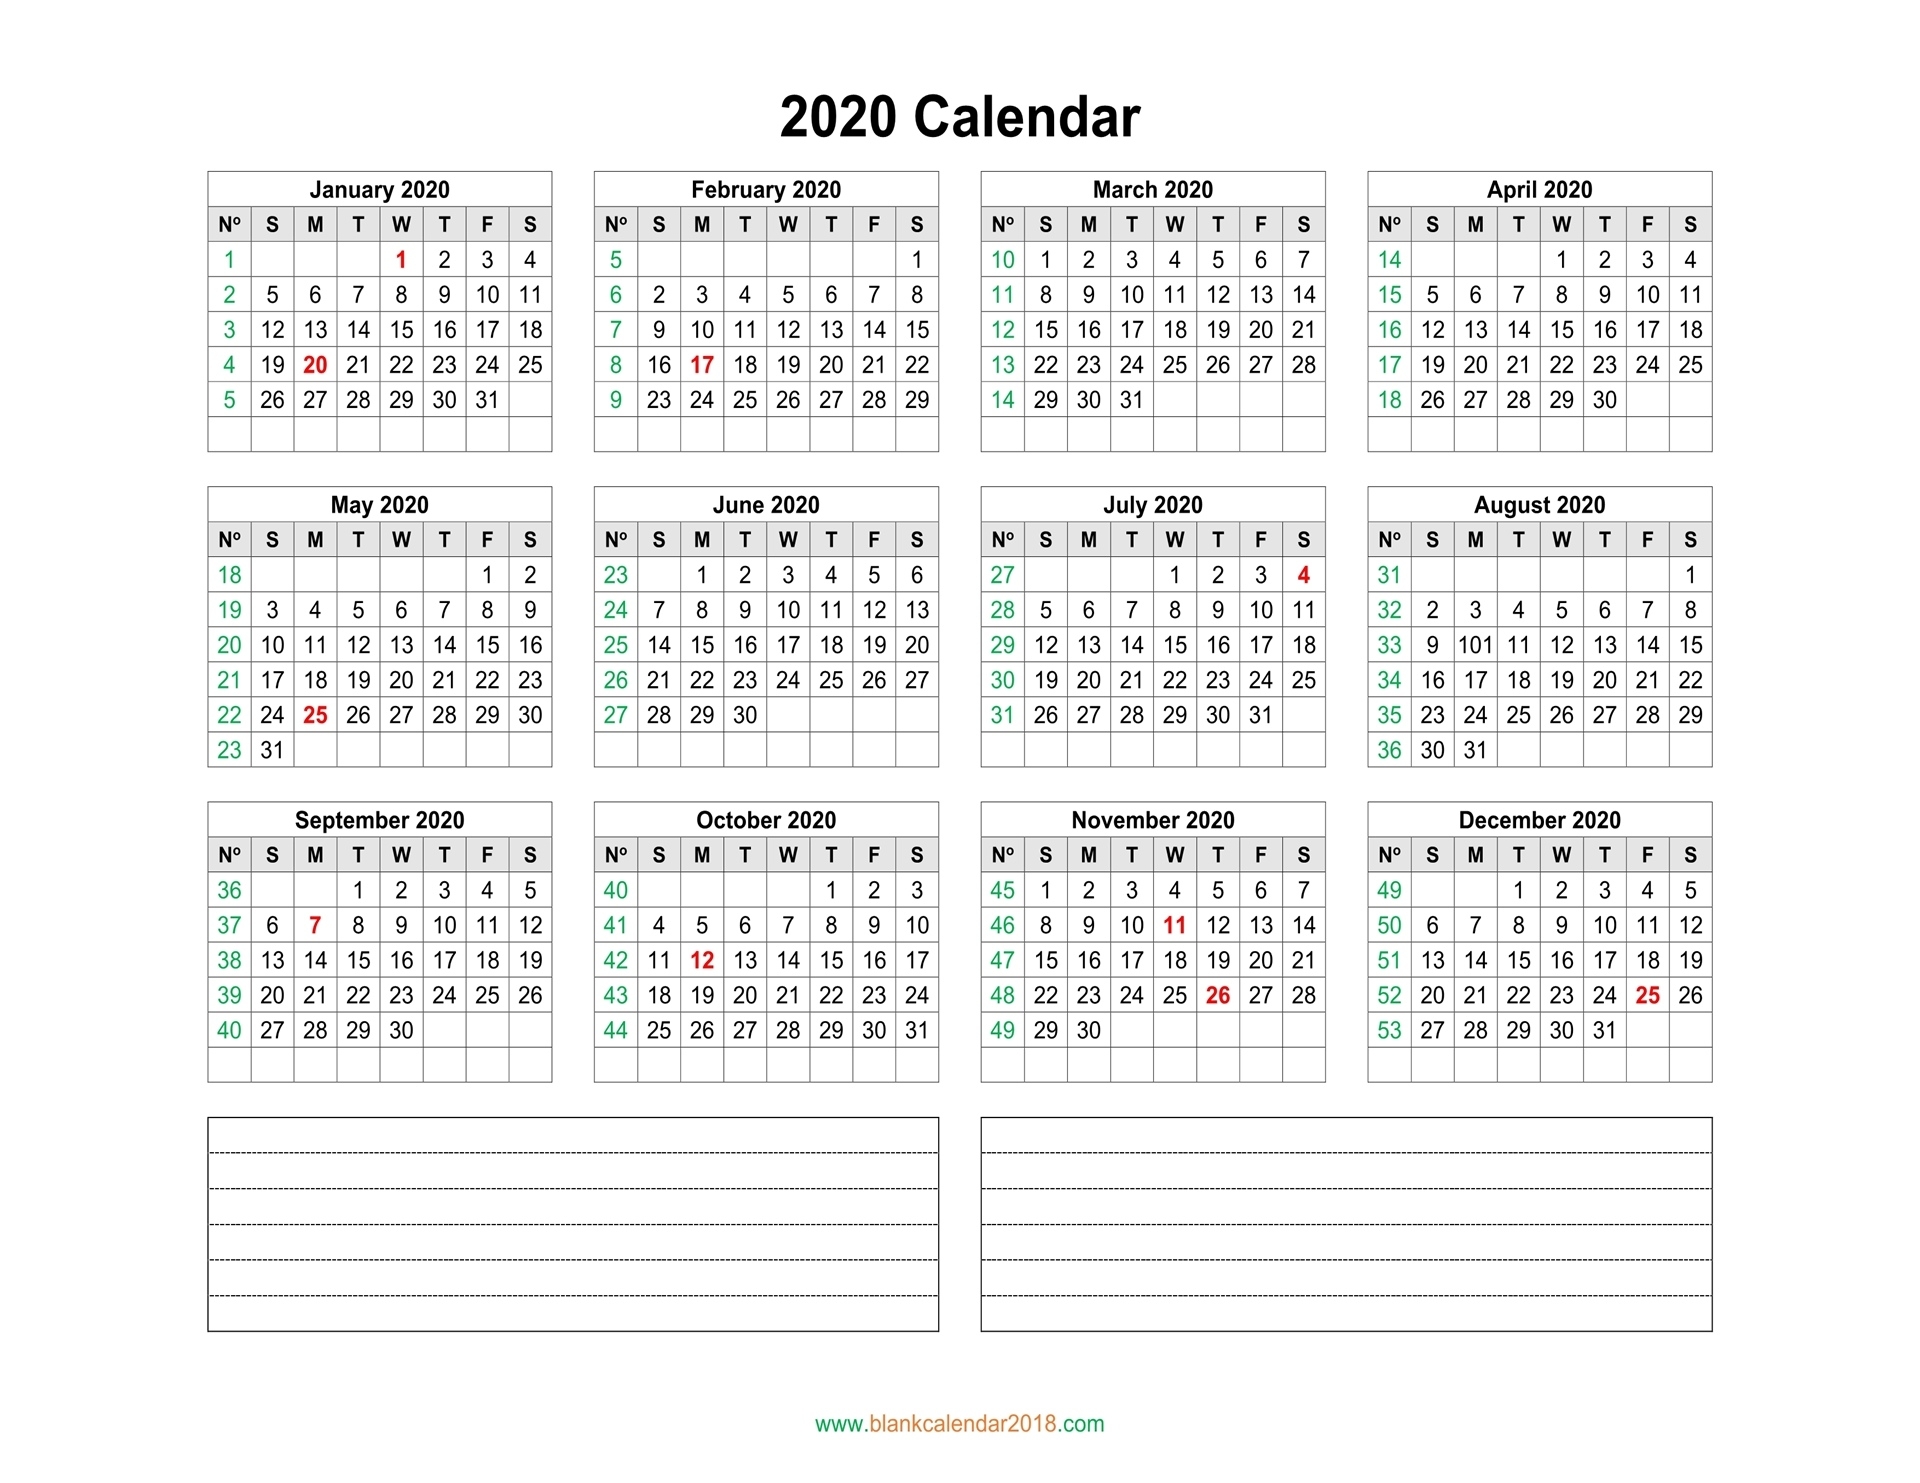 Blank Calendar 2020 Exceptional 2020 Calendar Template That Has Days Numbered